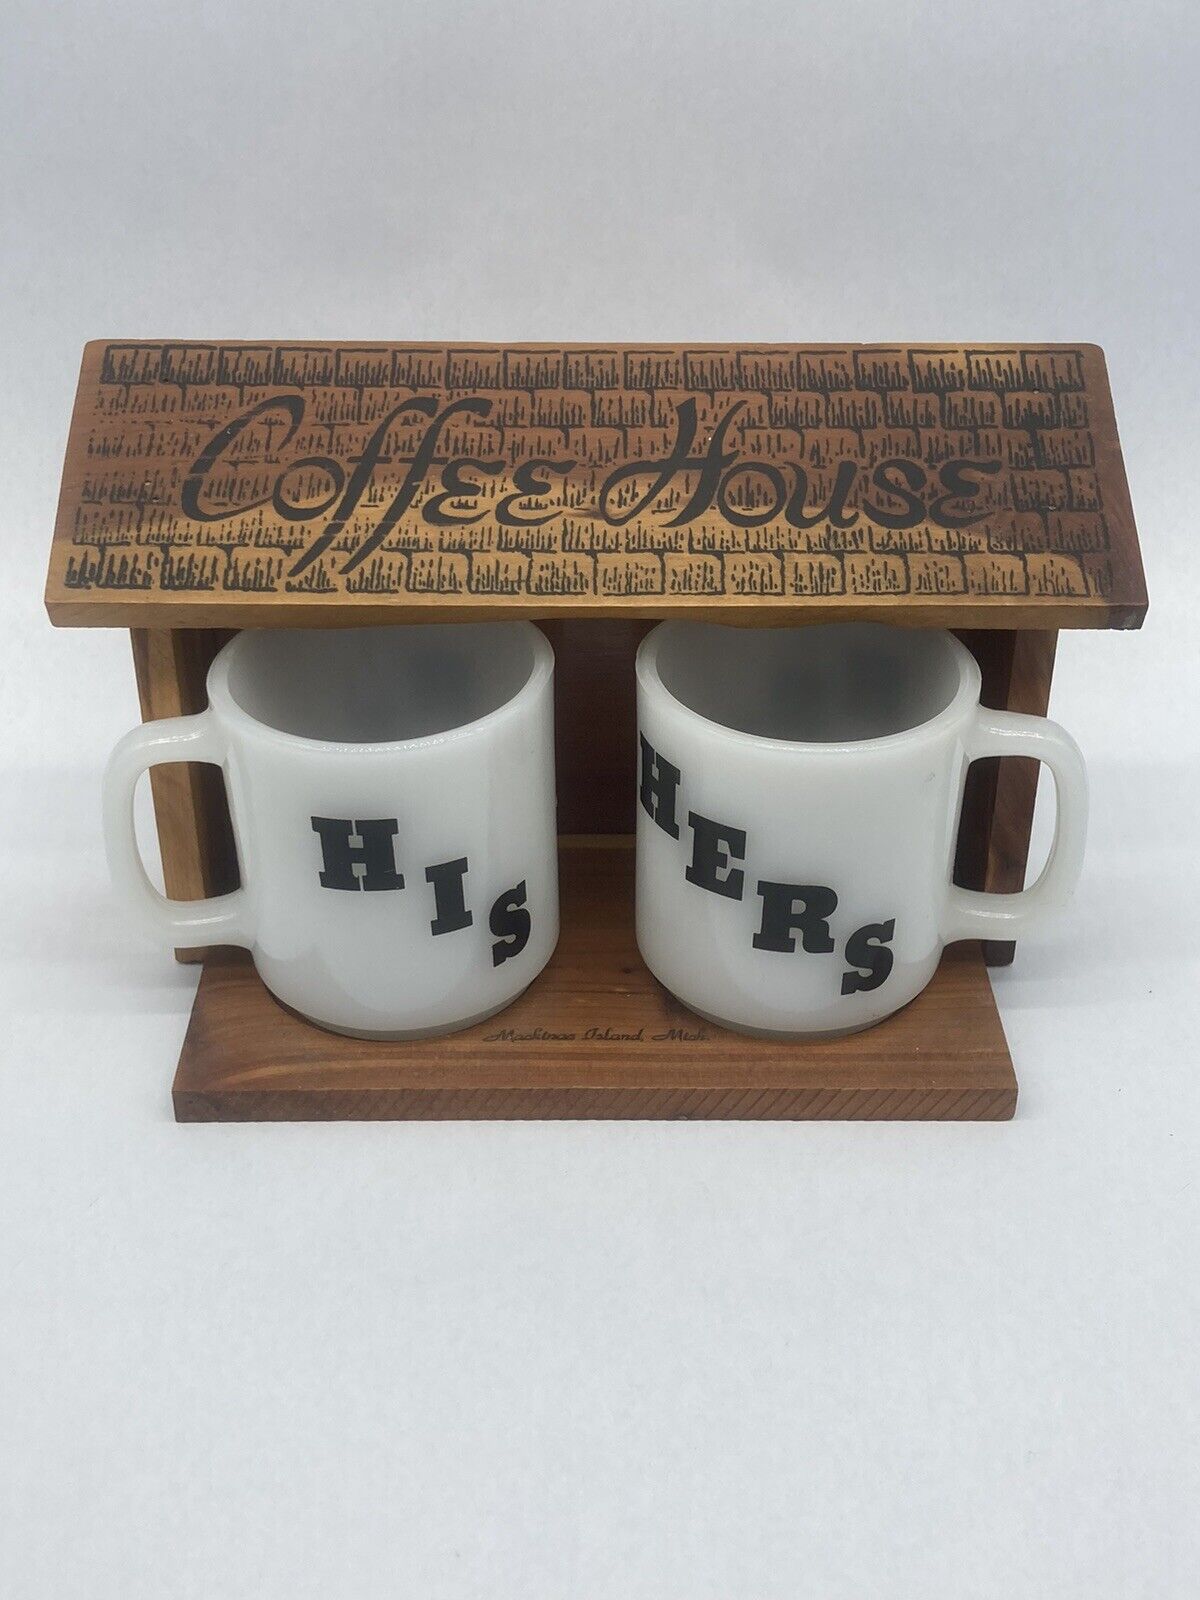 Vintage 1960’s Coffee House His & Hers Milk Glass Bake Cup Set In Wooden Shack